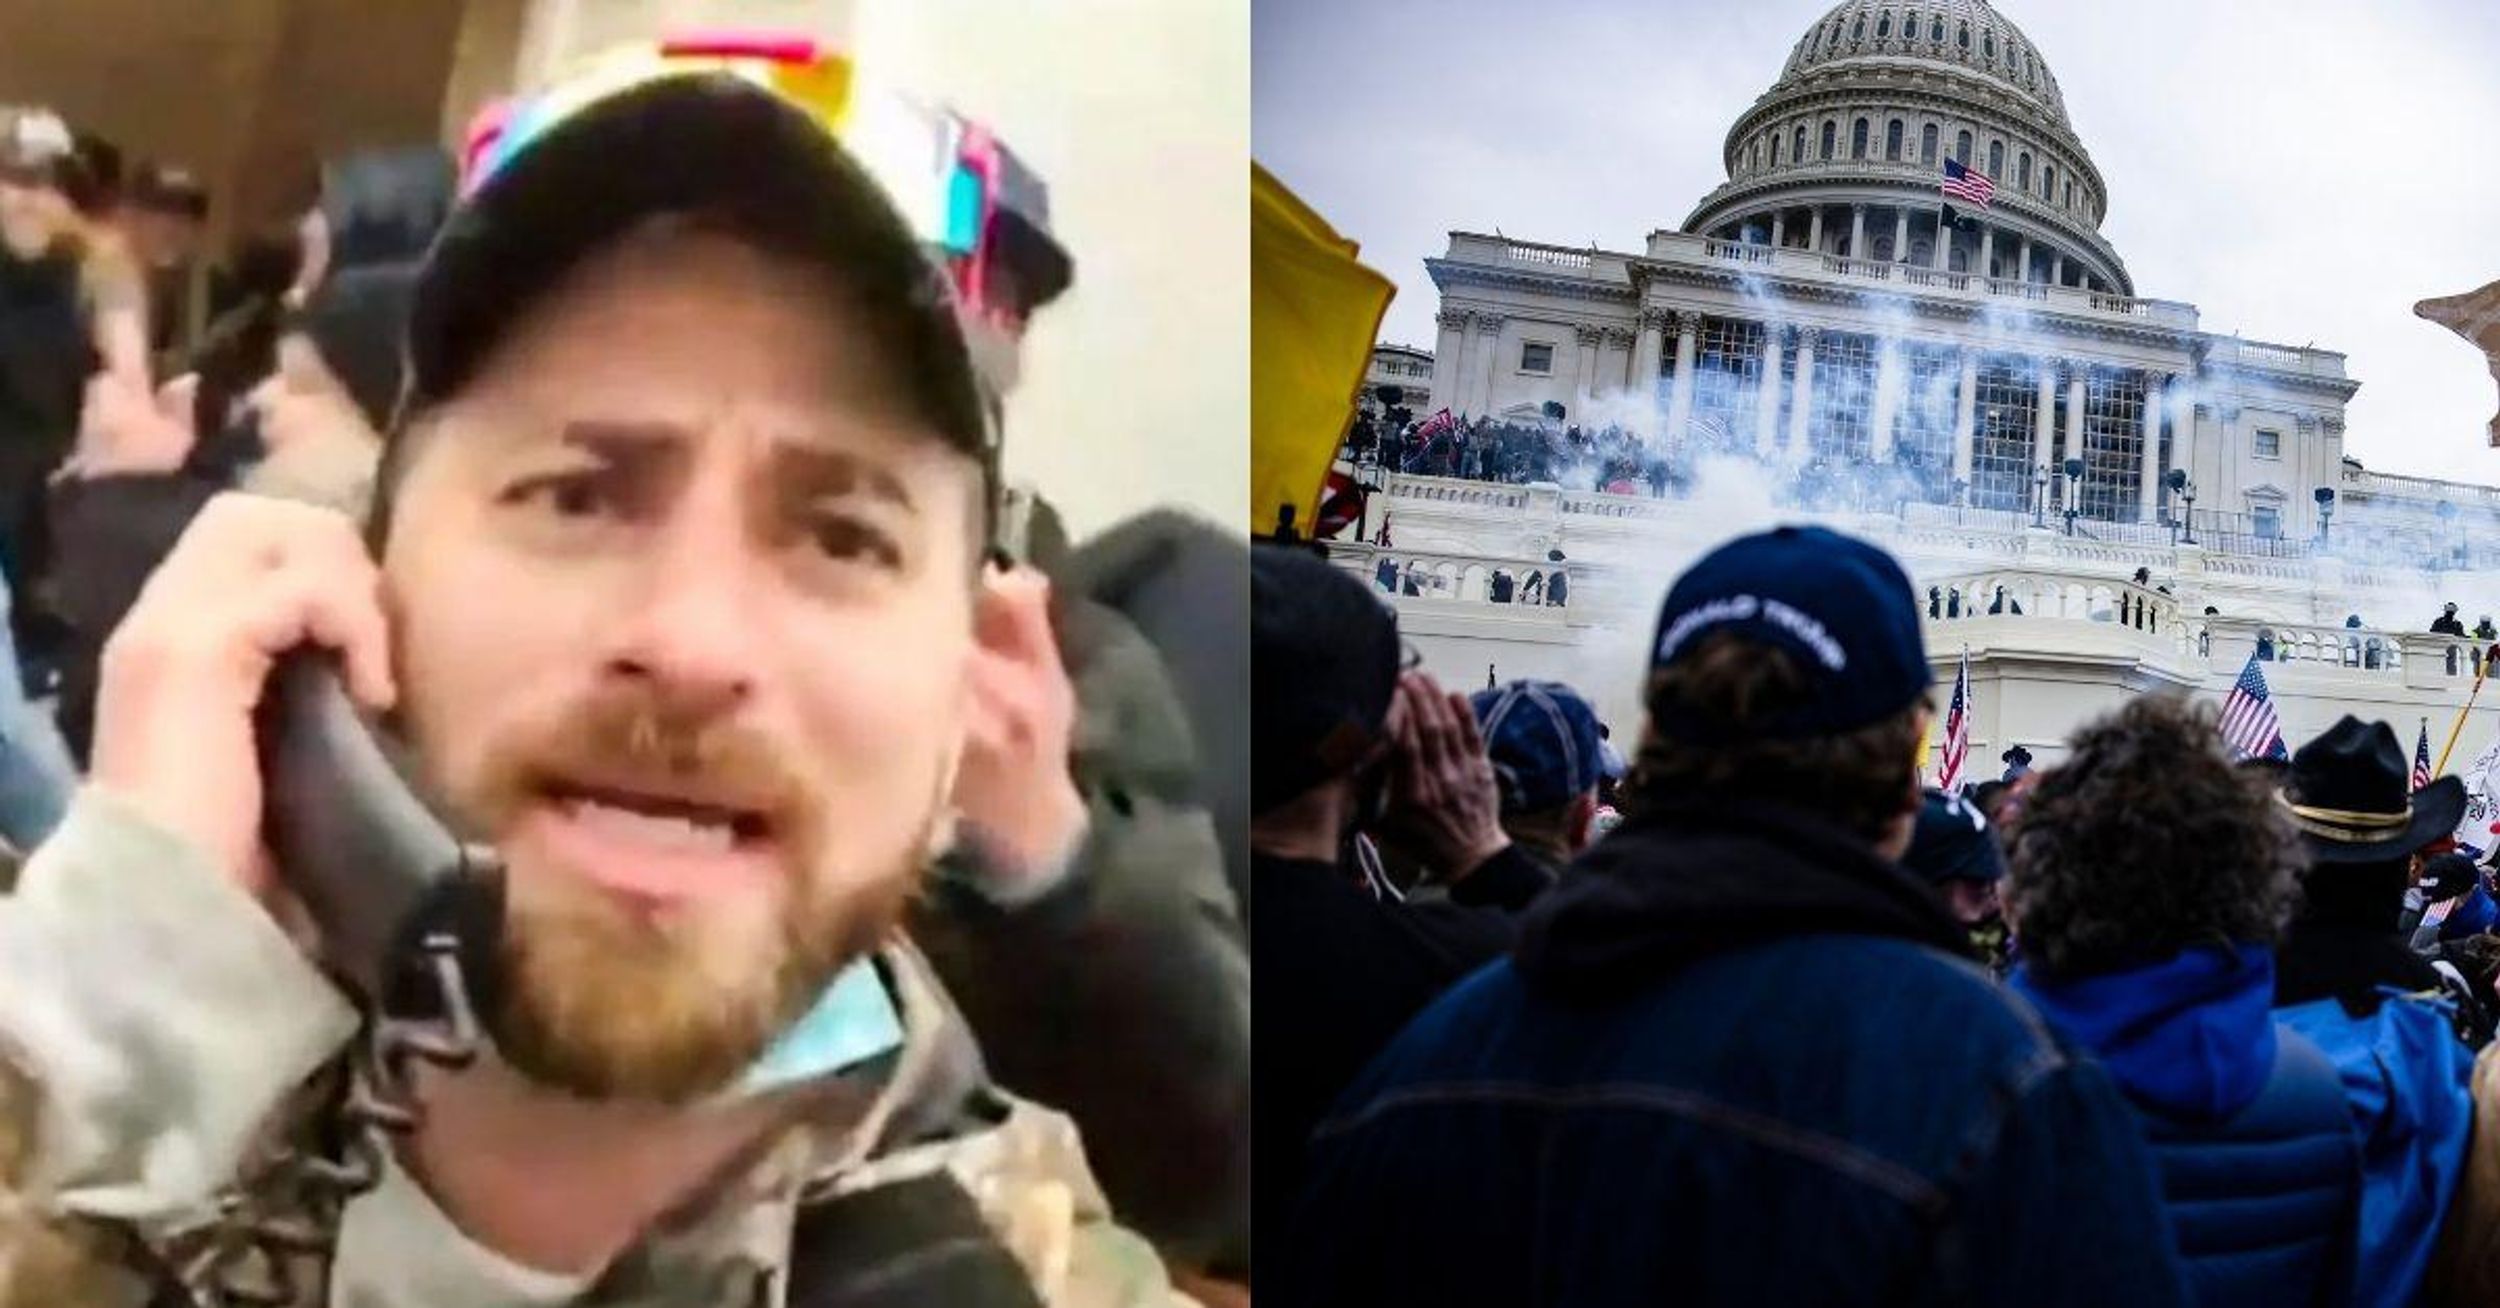 Capitol Rioter Who Livestreamed Jan. 6 Mocked For Blowing Up Plea Deal With 'Innocent' Claim